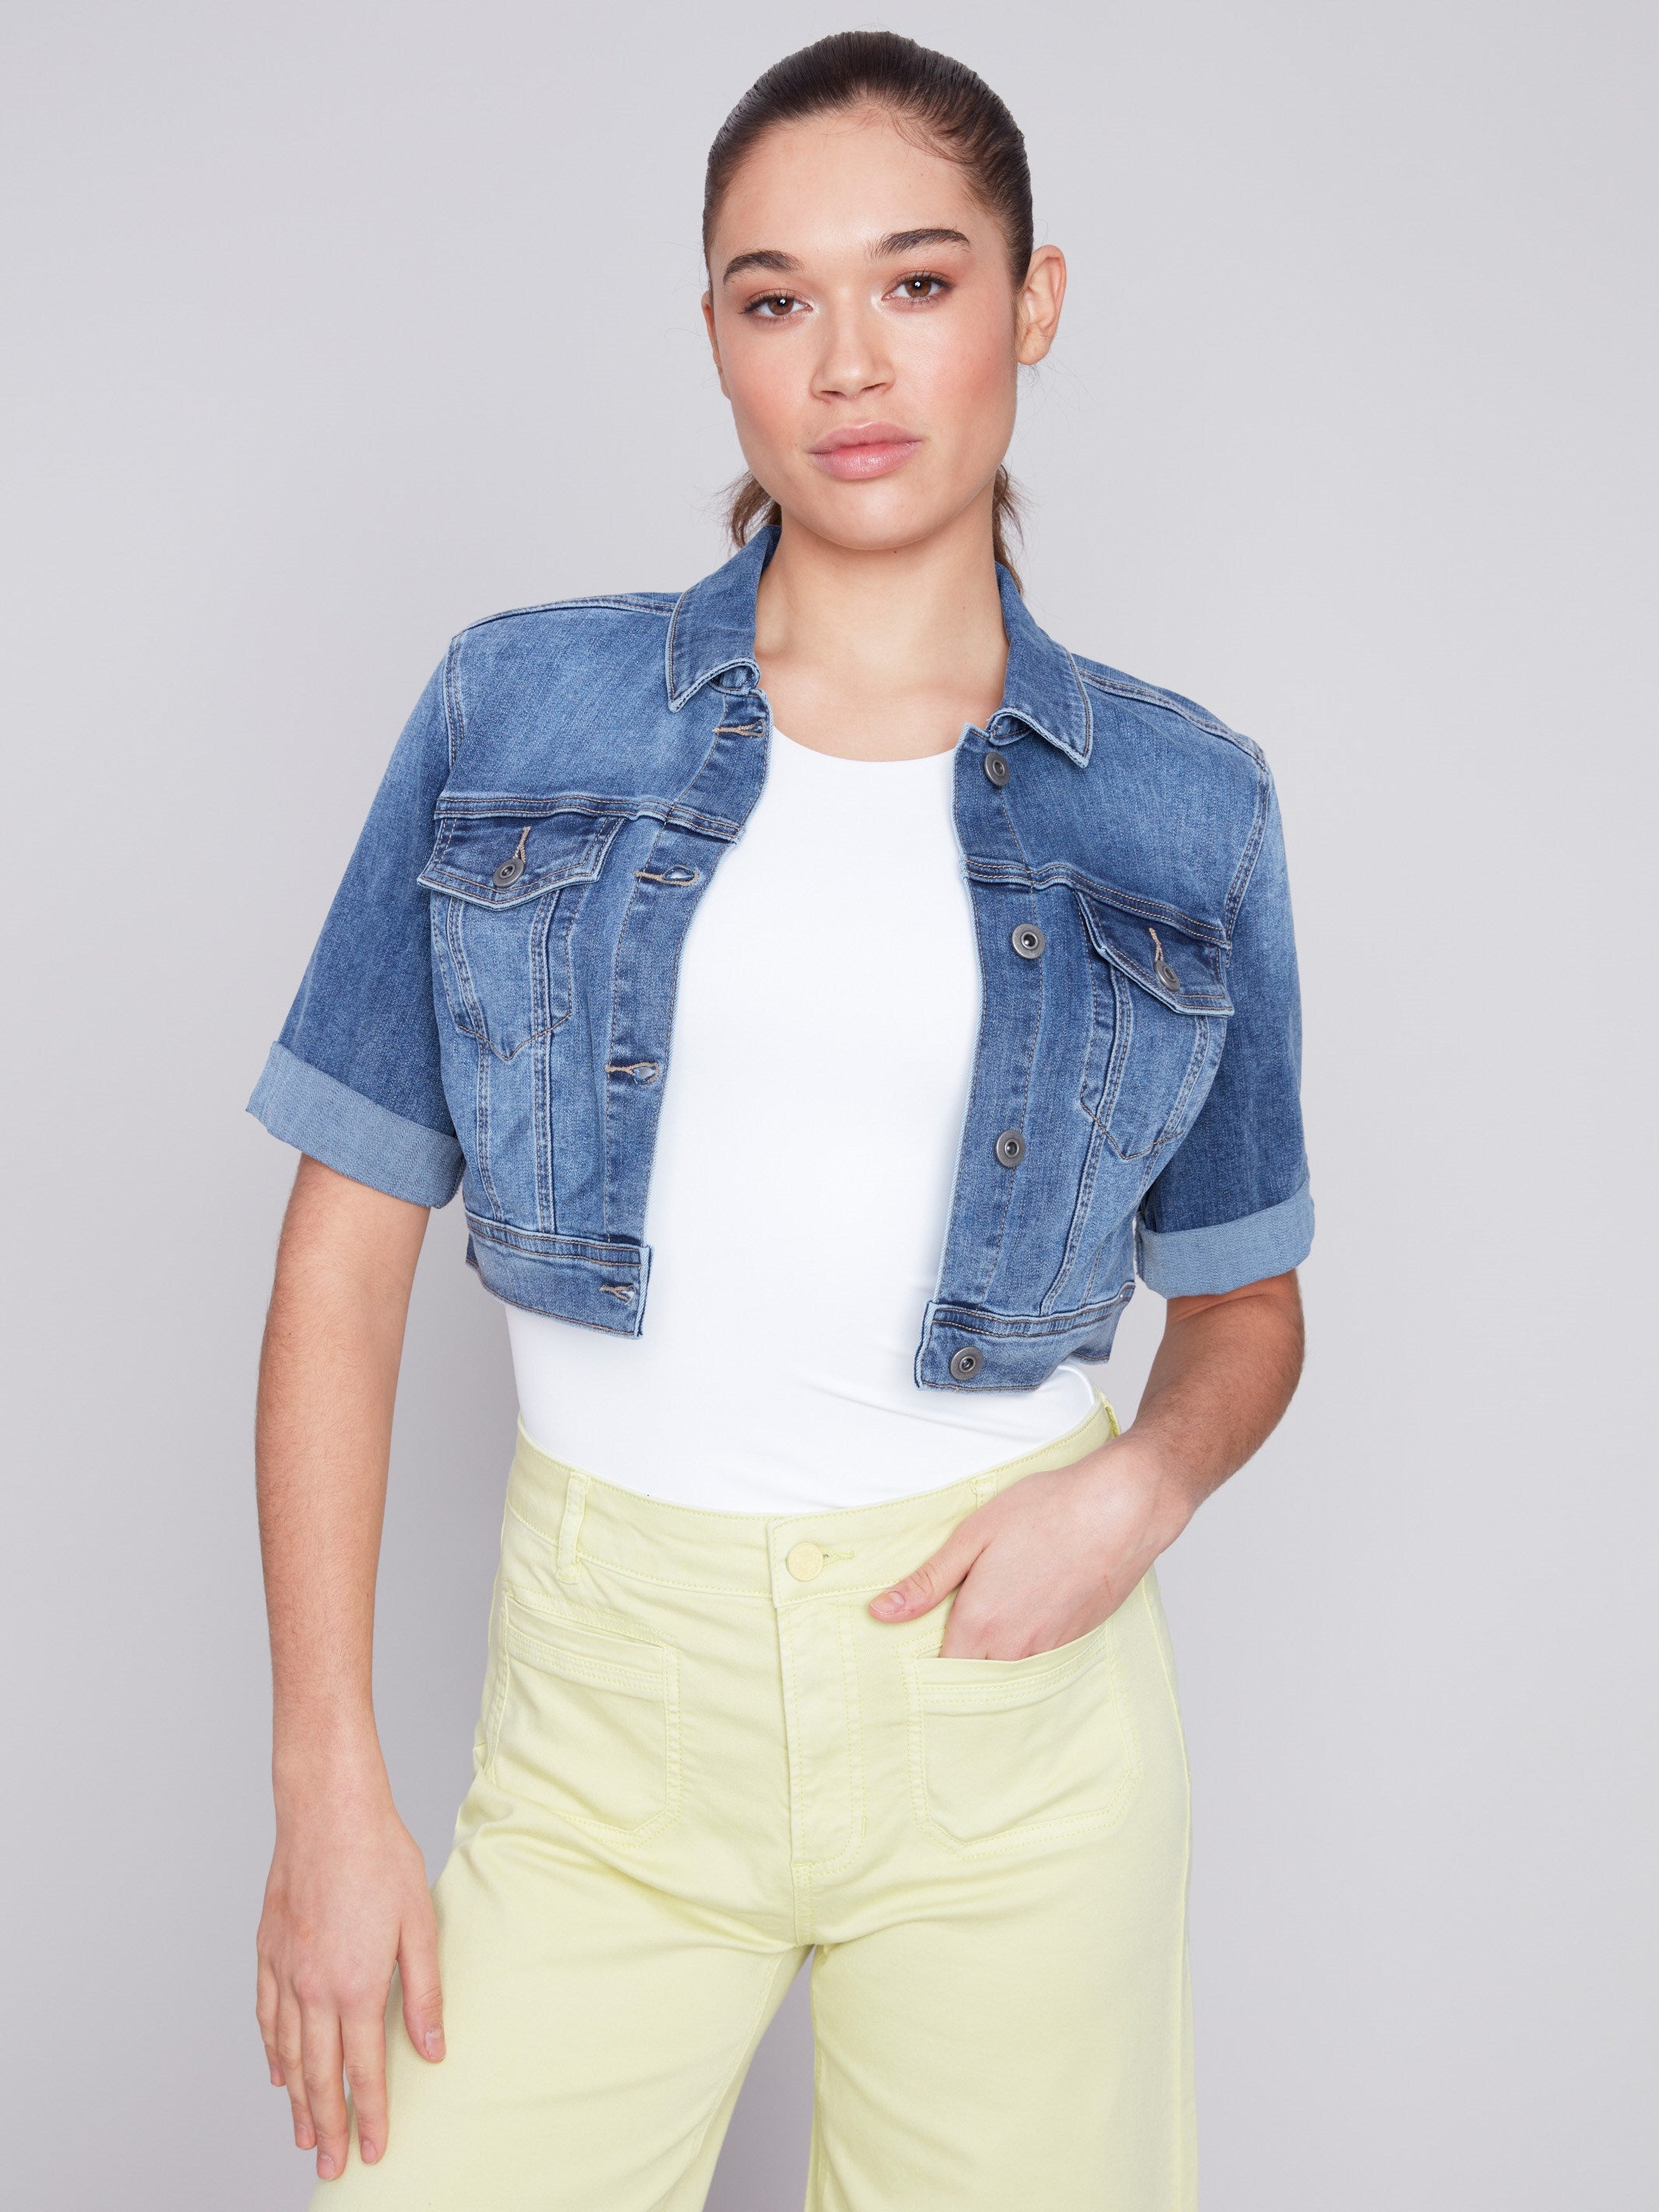 Cropped Jean Jacket - Medium Blue - Charlie B Collection Canada - Image 1